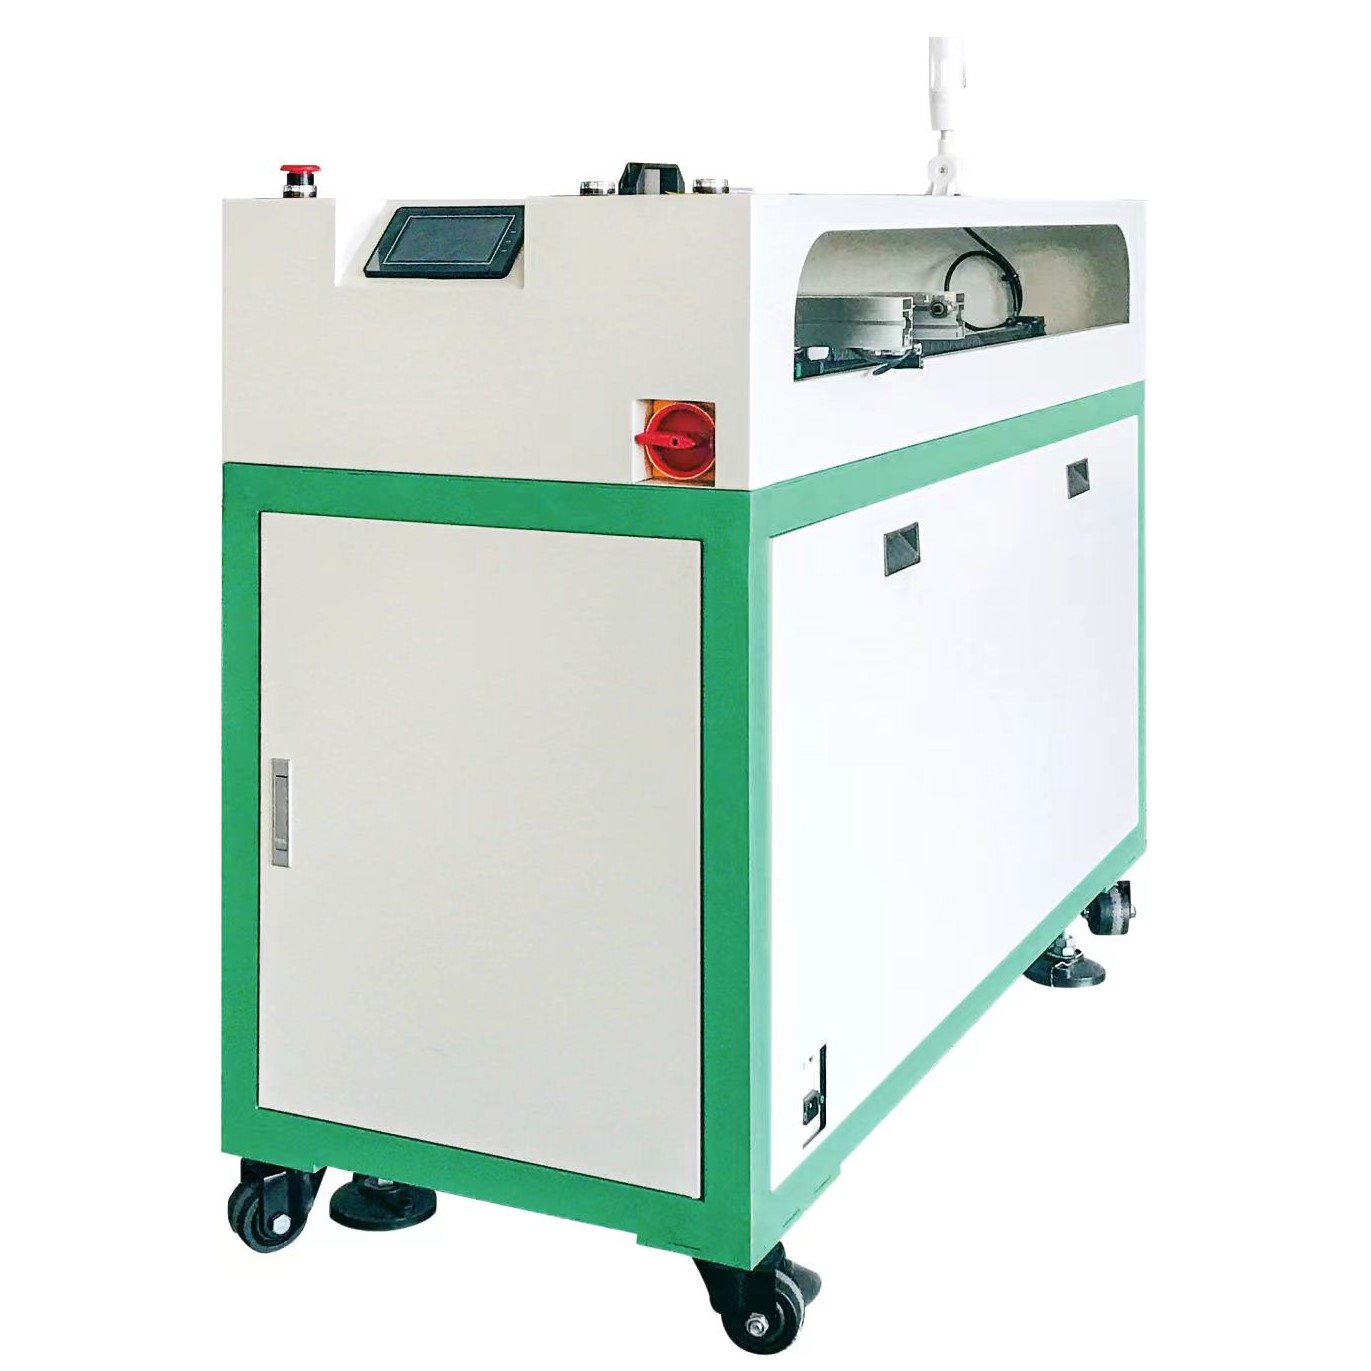 Sturdy, stable and easy to operate the transfer machine